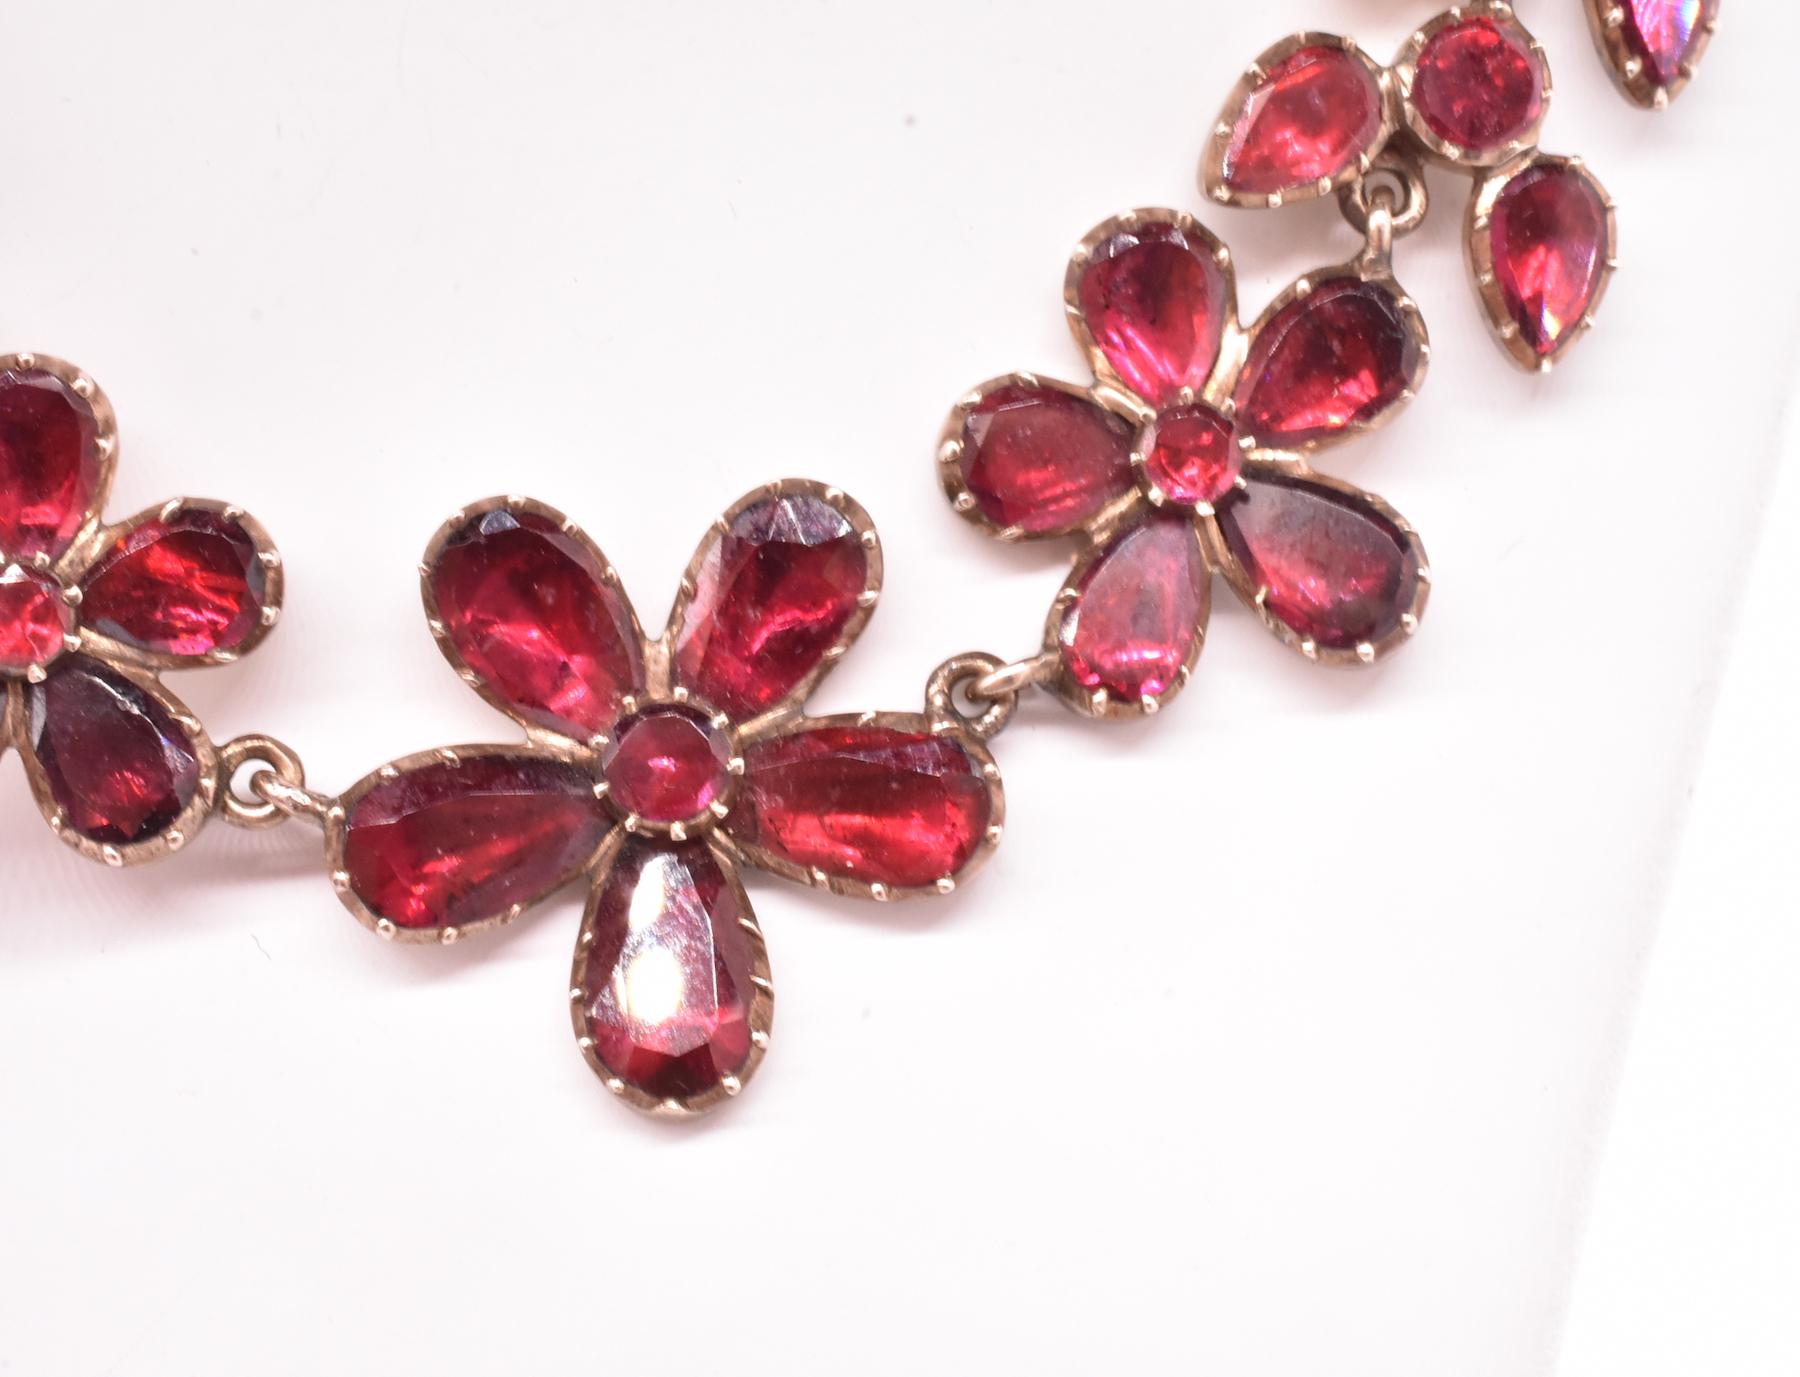 Flat cut almandine garnets were the most popular gemstone of the Georgian period shown here in a rarely found naturalistic floral and leaf design necklace set in 18K gold. The pansy shaped flowers represent remembrance and are graduated in size.